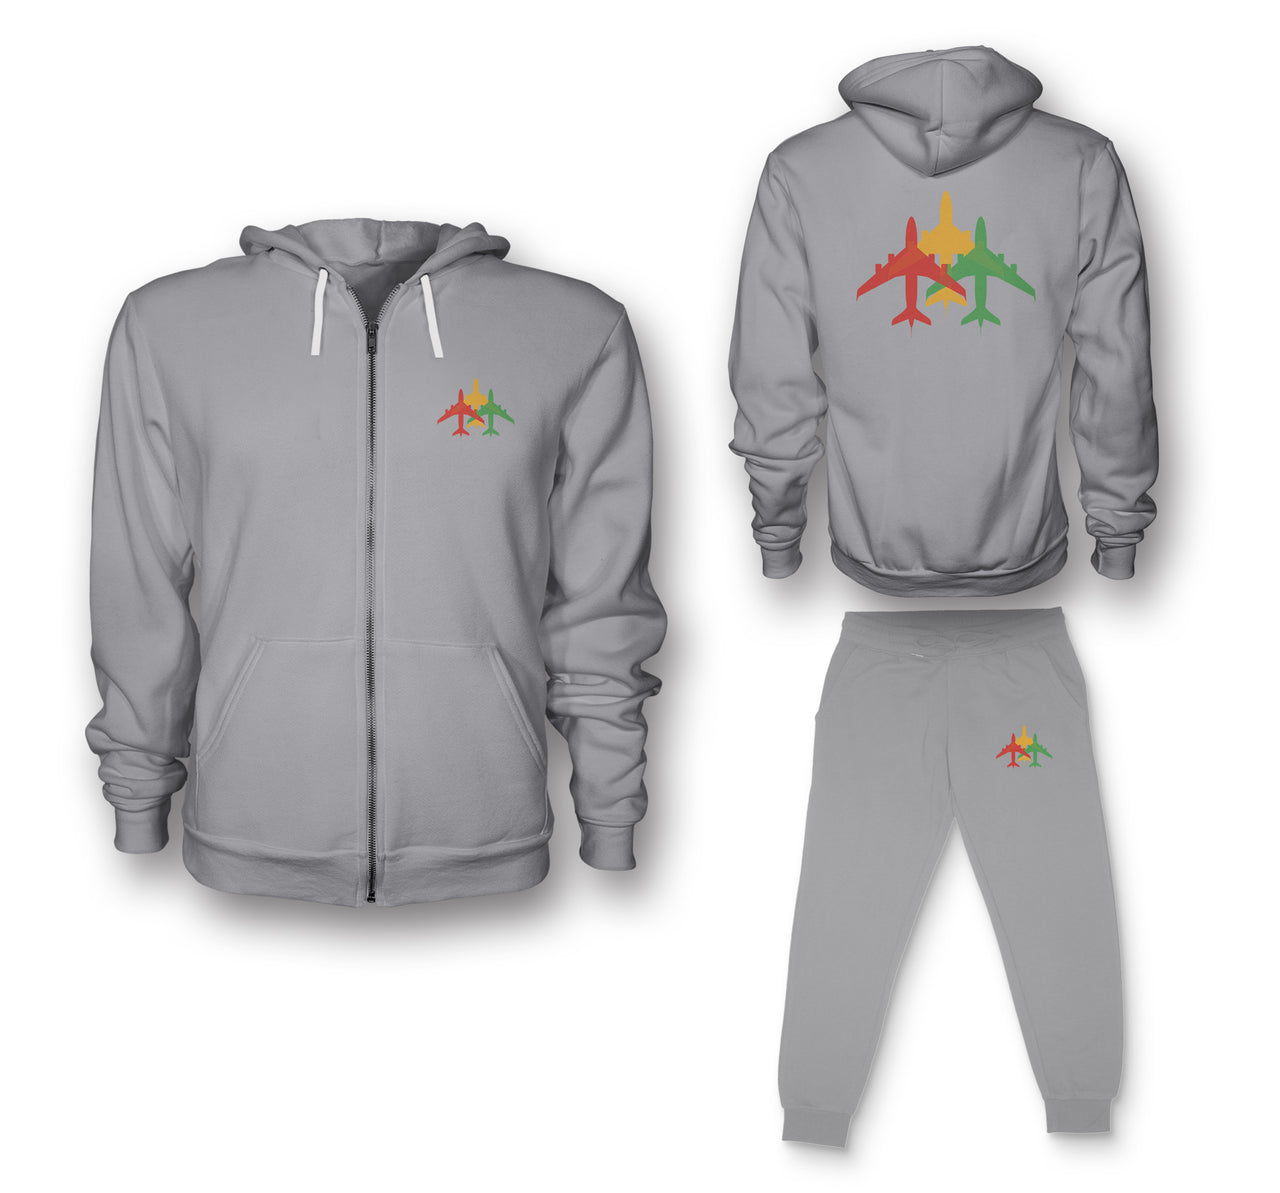 Colourful 3 Airplanes Designed Zipped Hoodies & Sweatpants Set